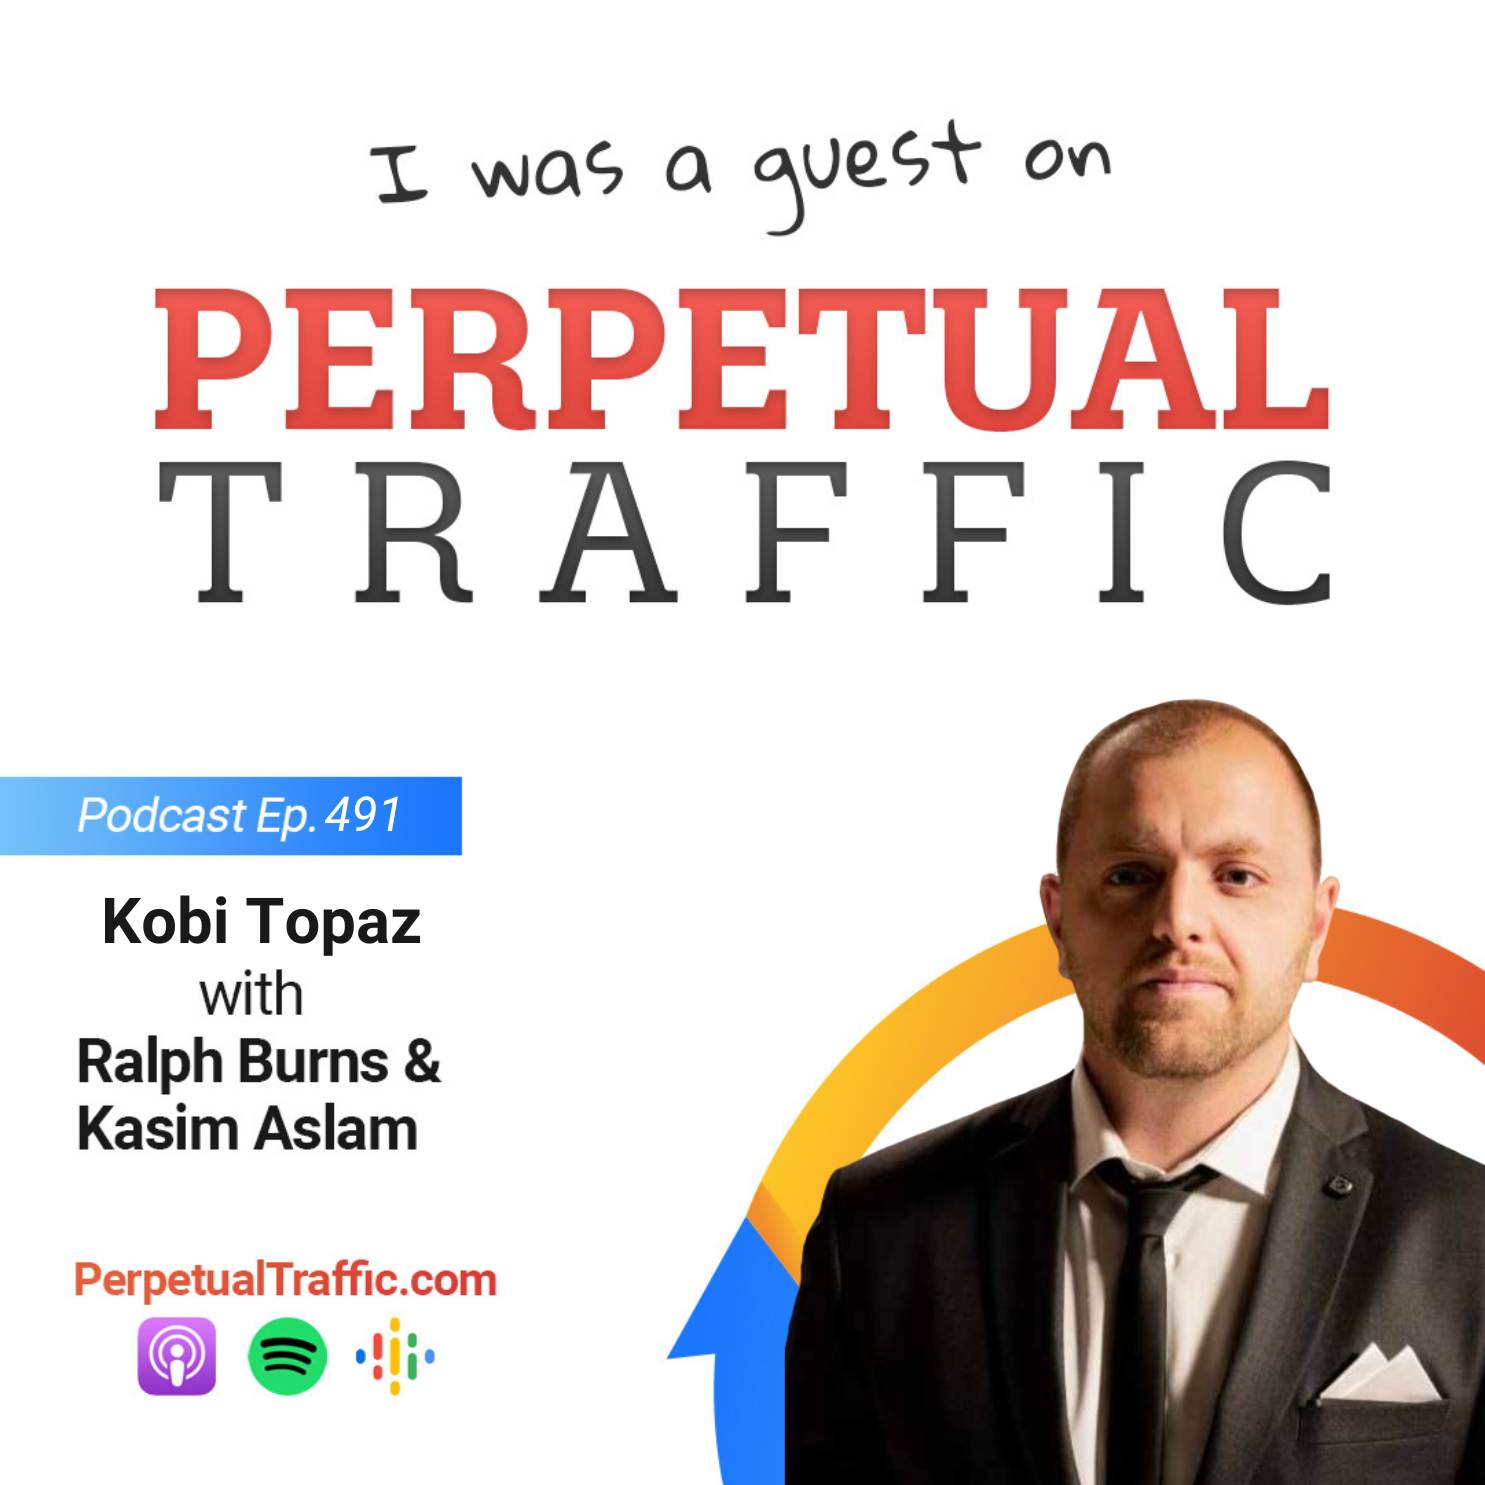 Artwork for podcast Perpetual Traffic